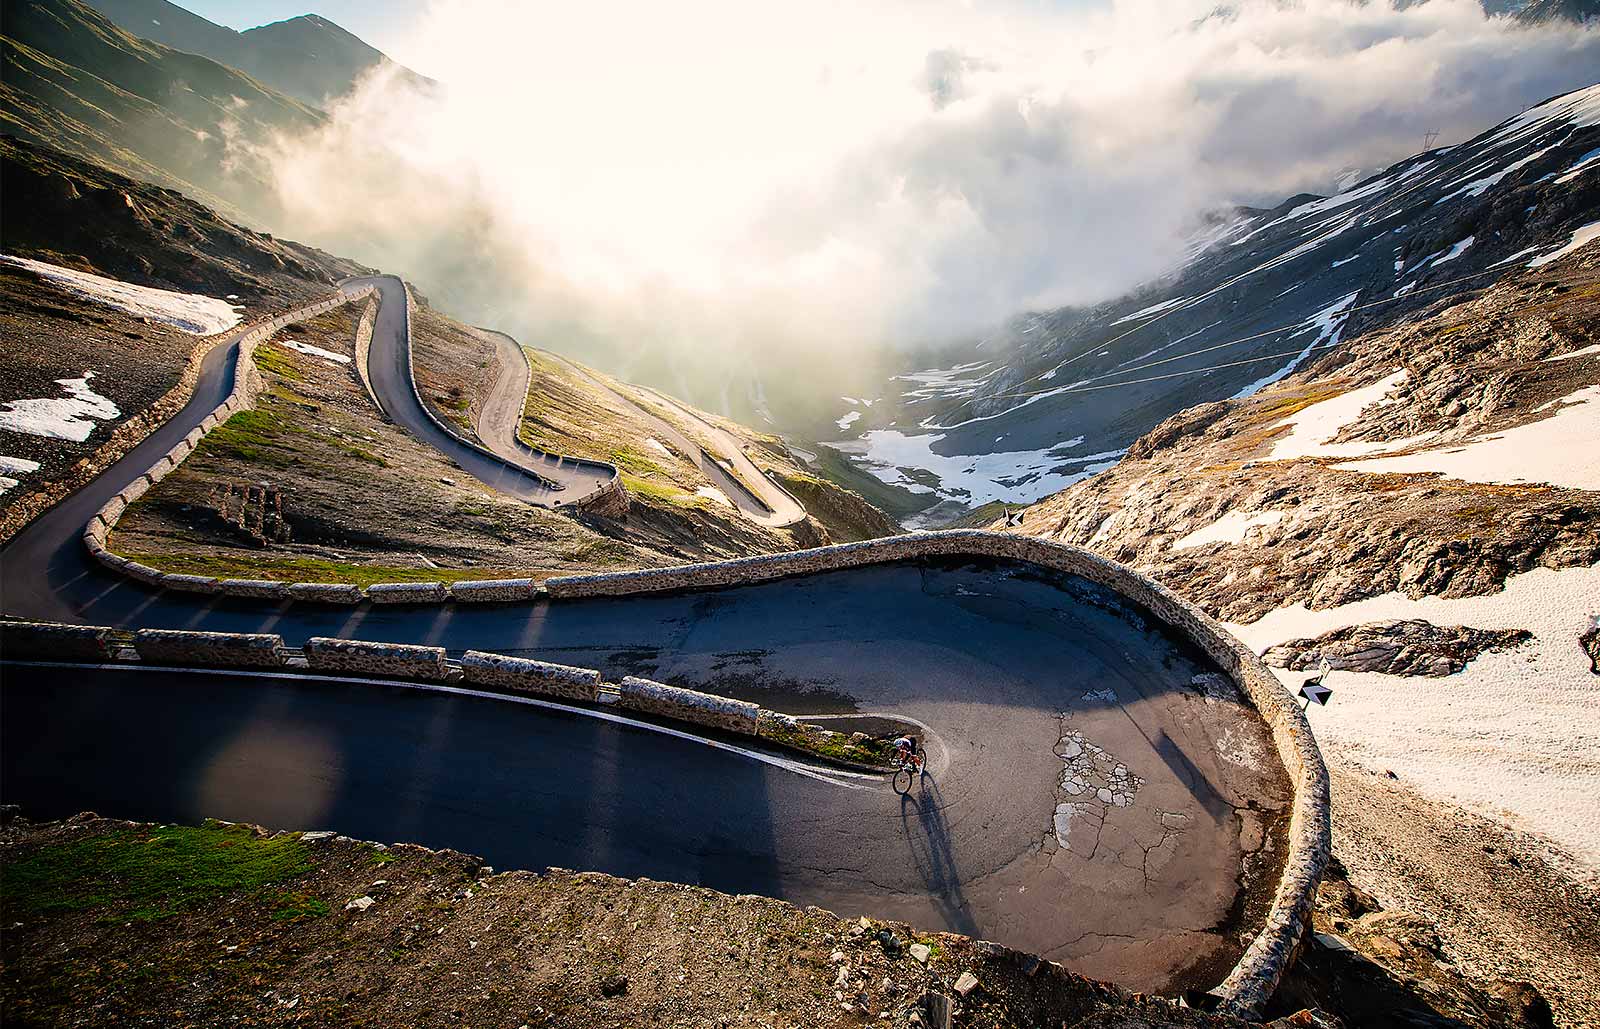 A sharp bend on the road that leads to passo dello Stelvio